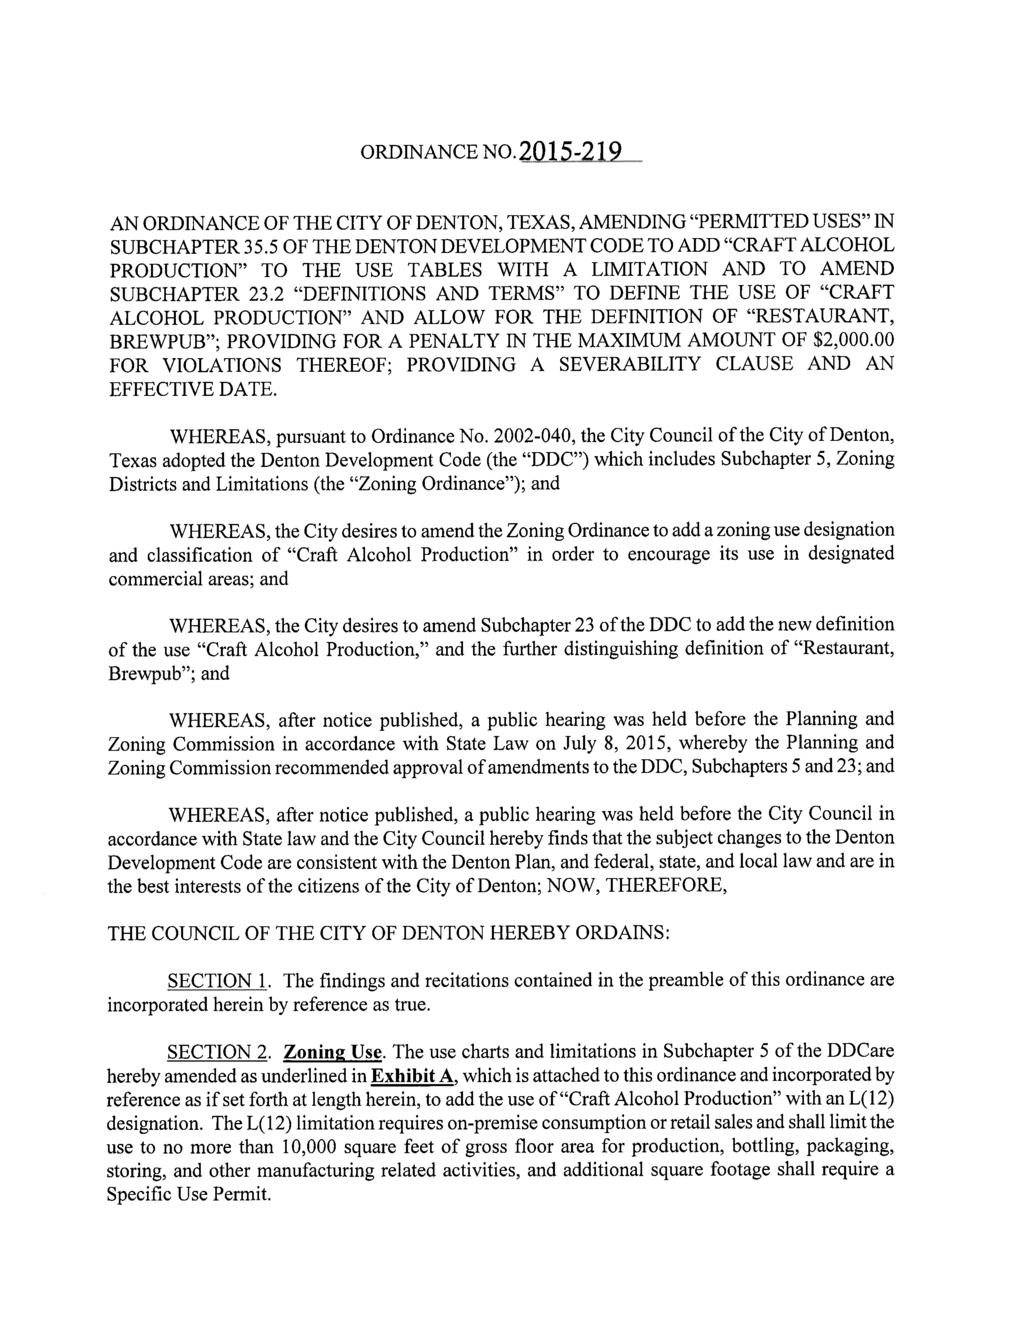 ORDINANCE N020 5 ṇ2j 9,,,_ AN ORDINANCE OF THE CITY OF DENTON, TEXAS, AMENDING "PERMITTED USES" IN SUBCHAPTER 35.